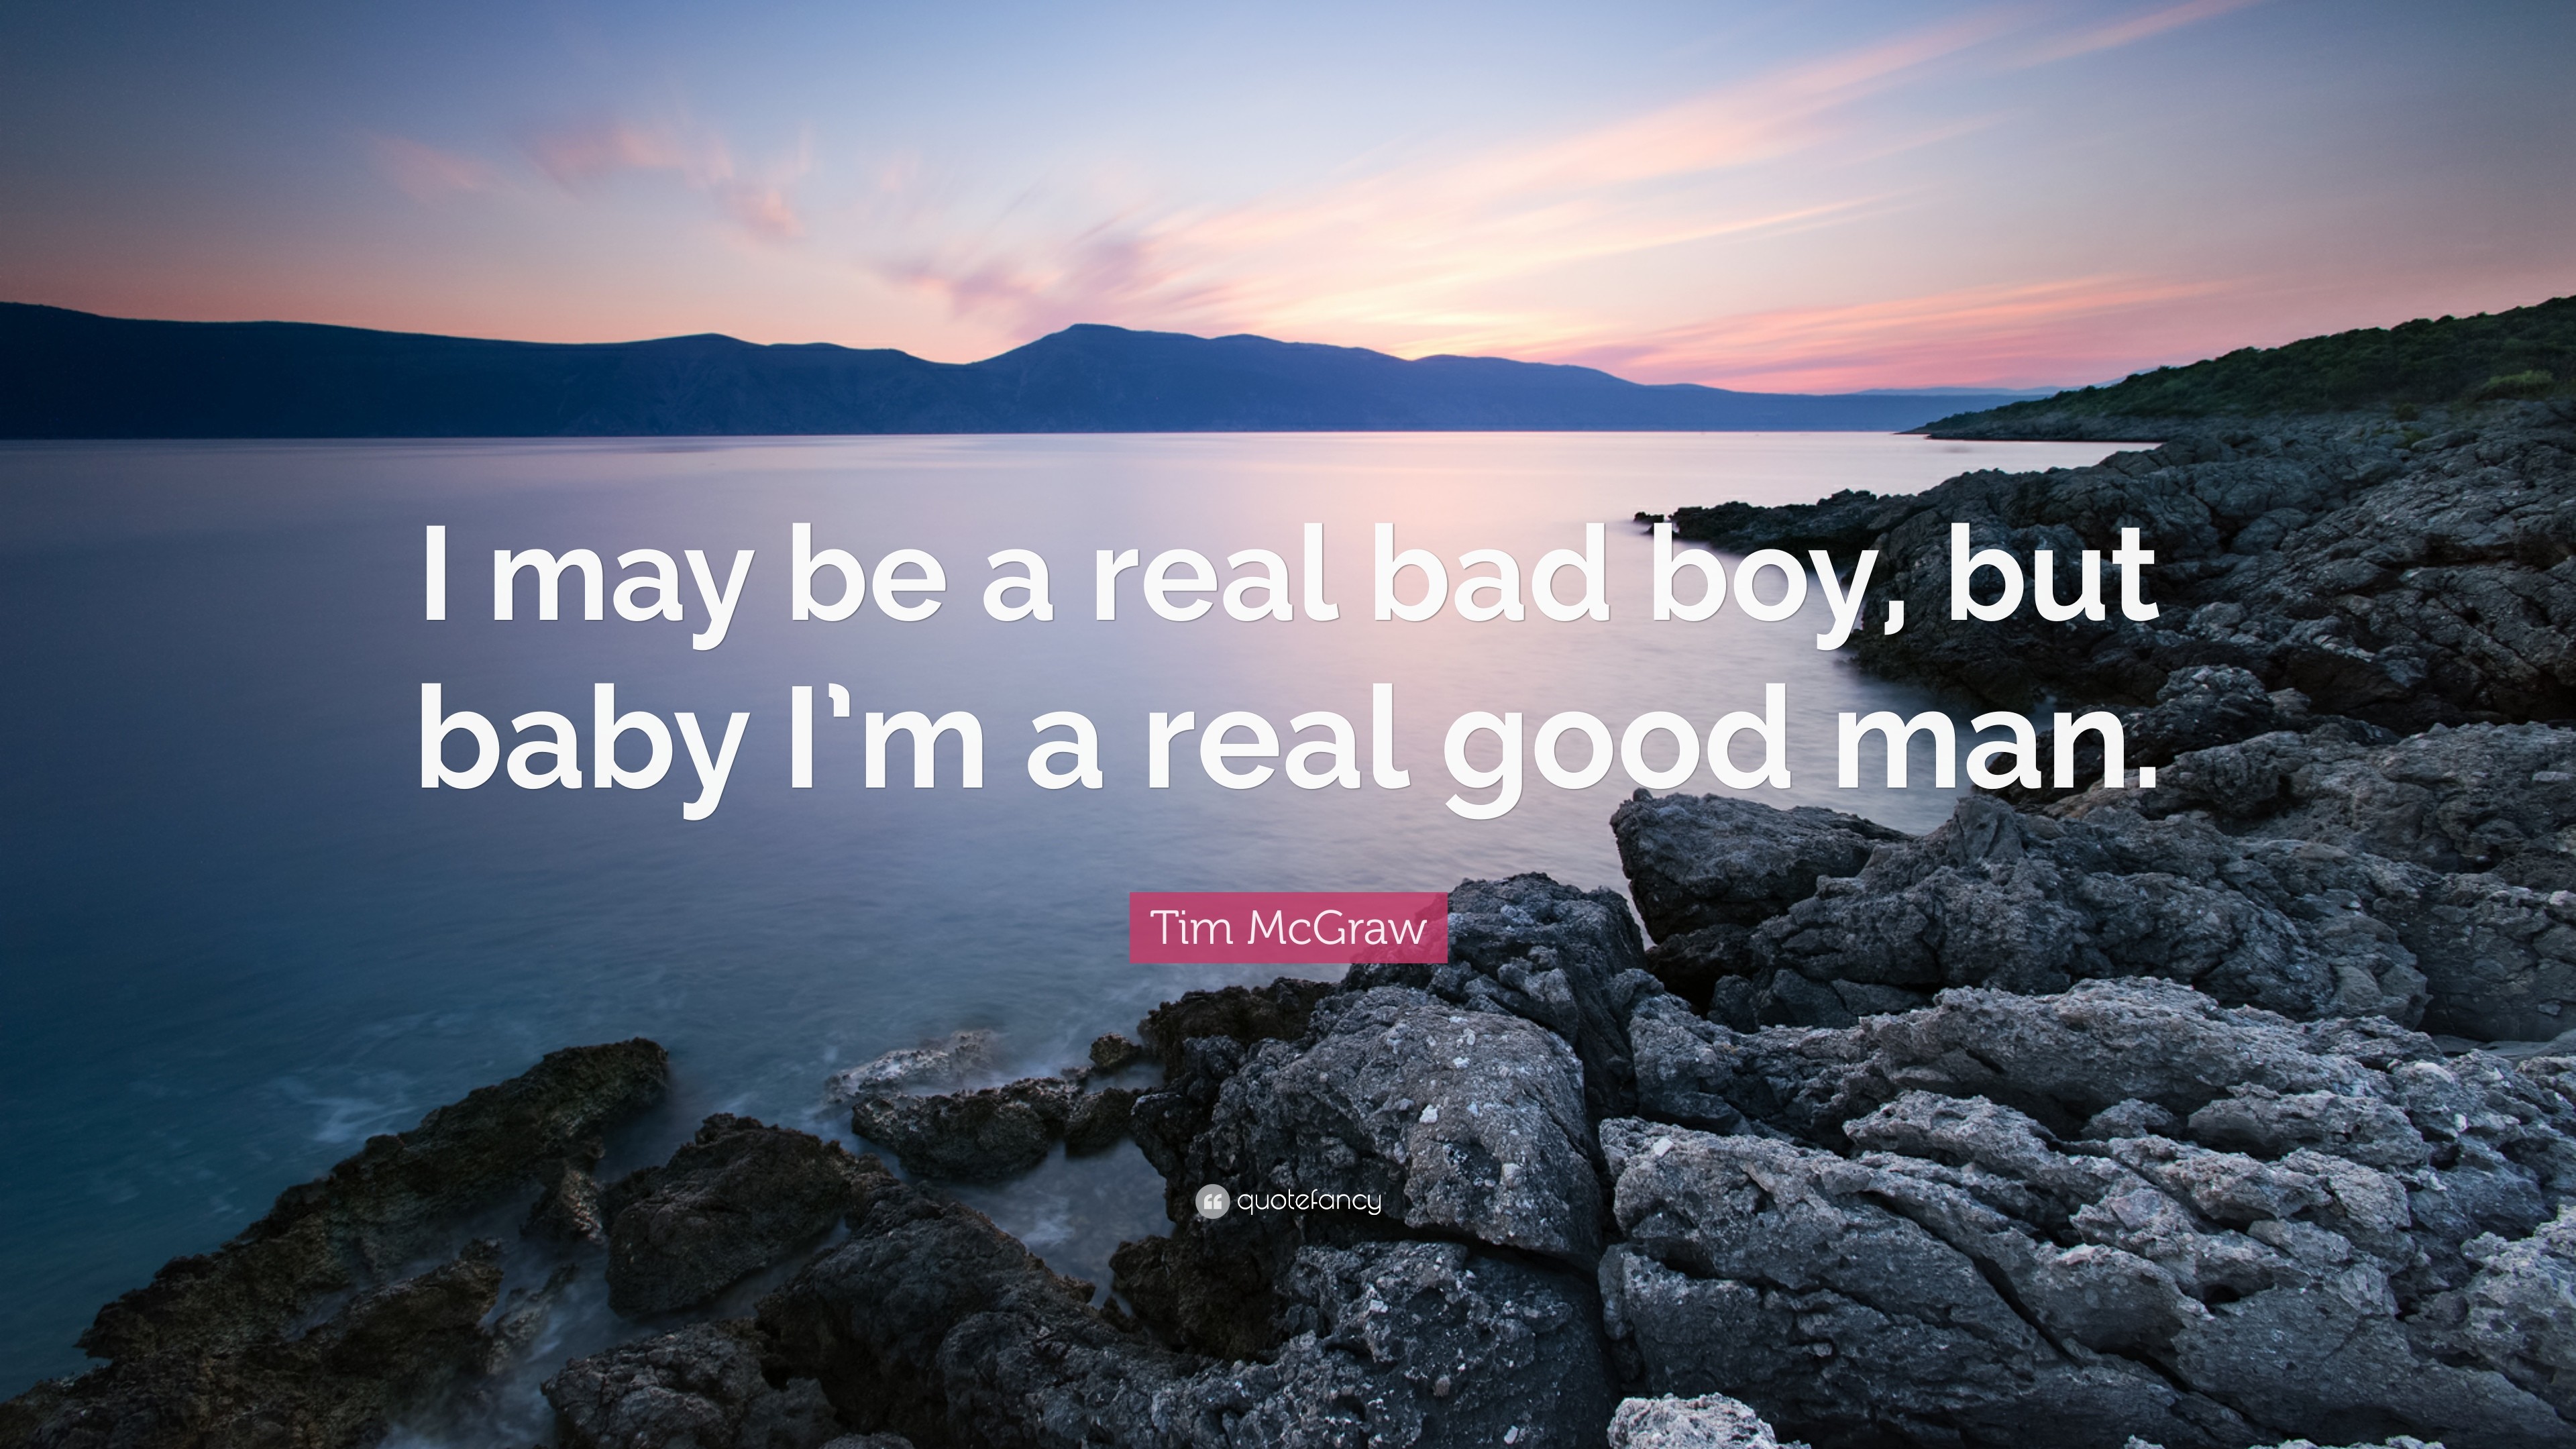 3840x2160 Tim McGraw Quote: “I may be a real bad boy, but baby I